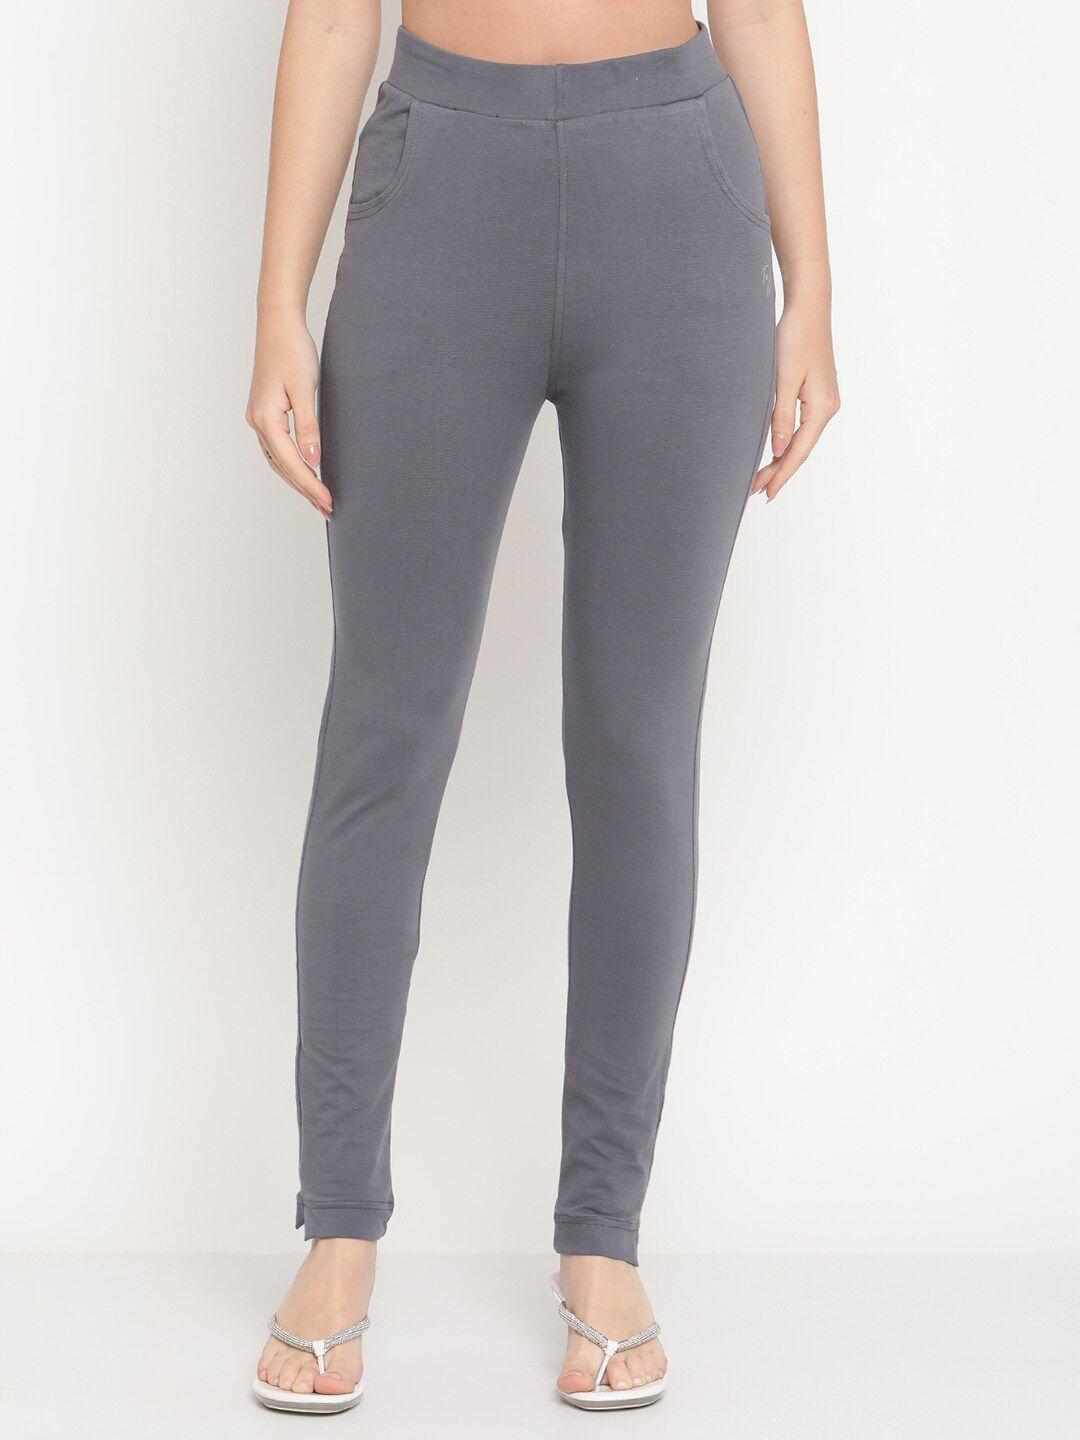 tag 7 women grey solid jeggings